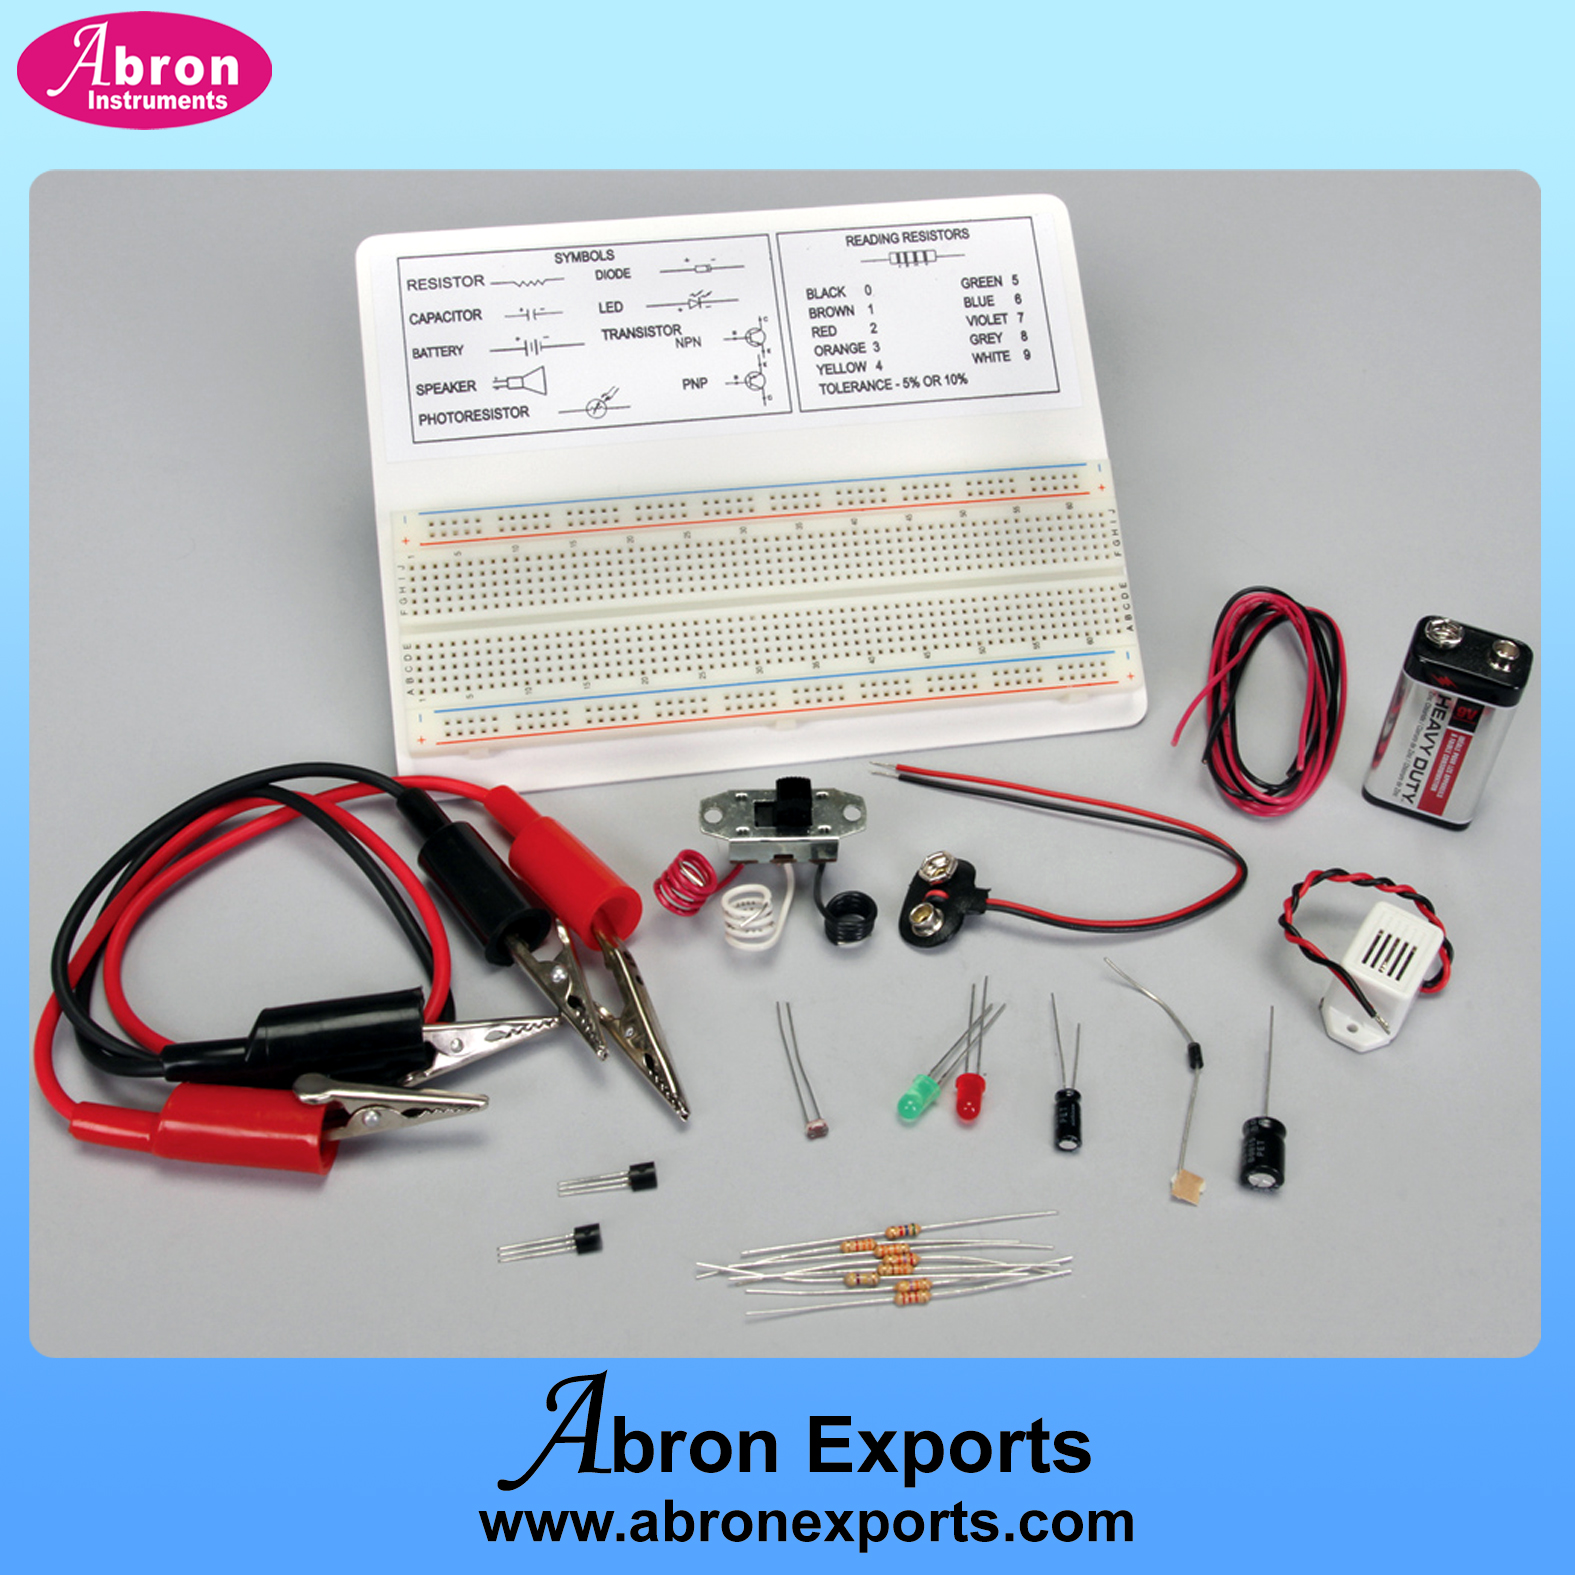 Electronic component abron kit circuit spare loose Investigating electronic study kit AE-1224K5